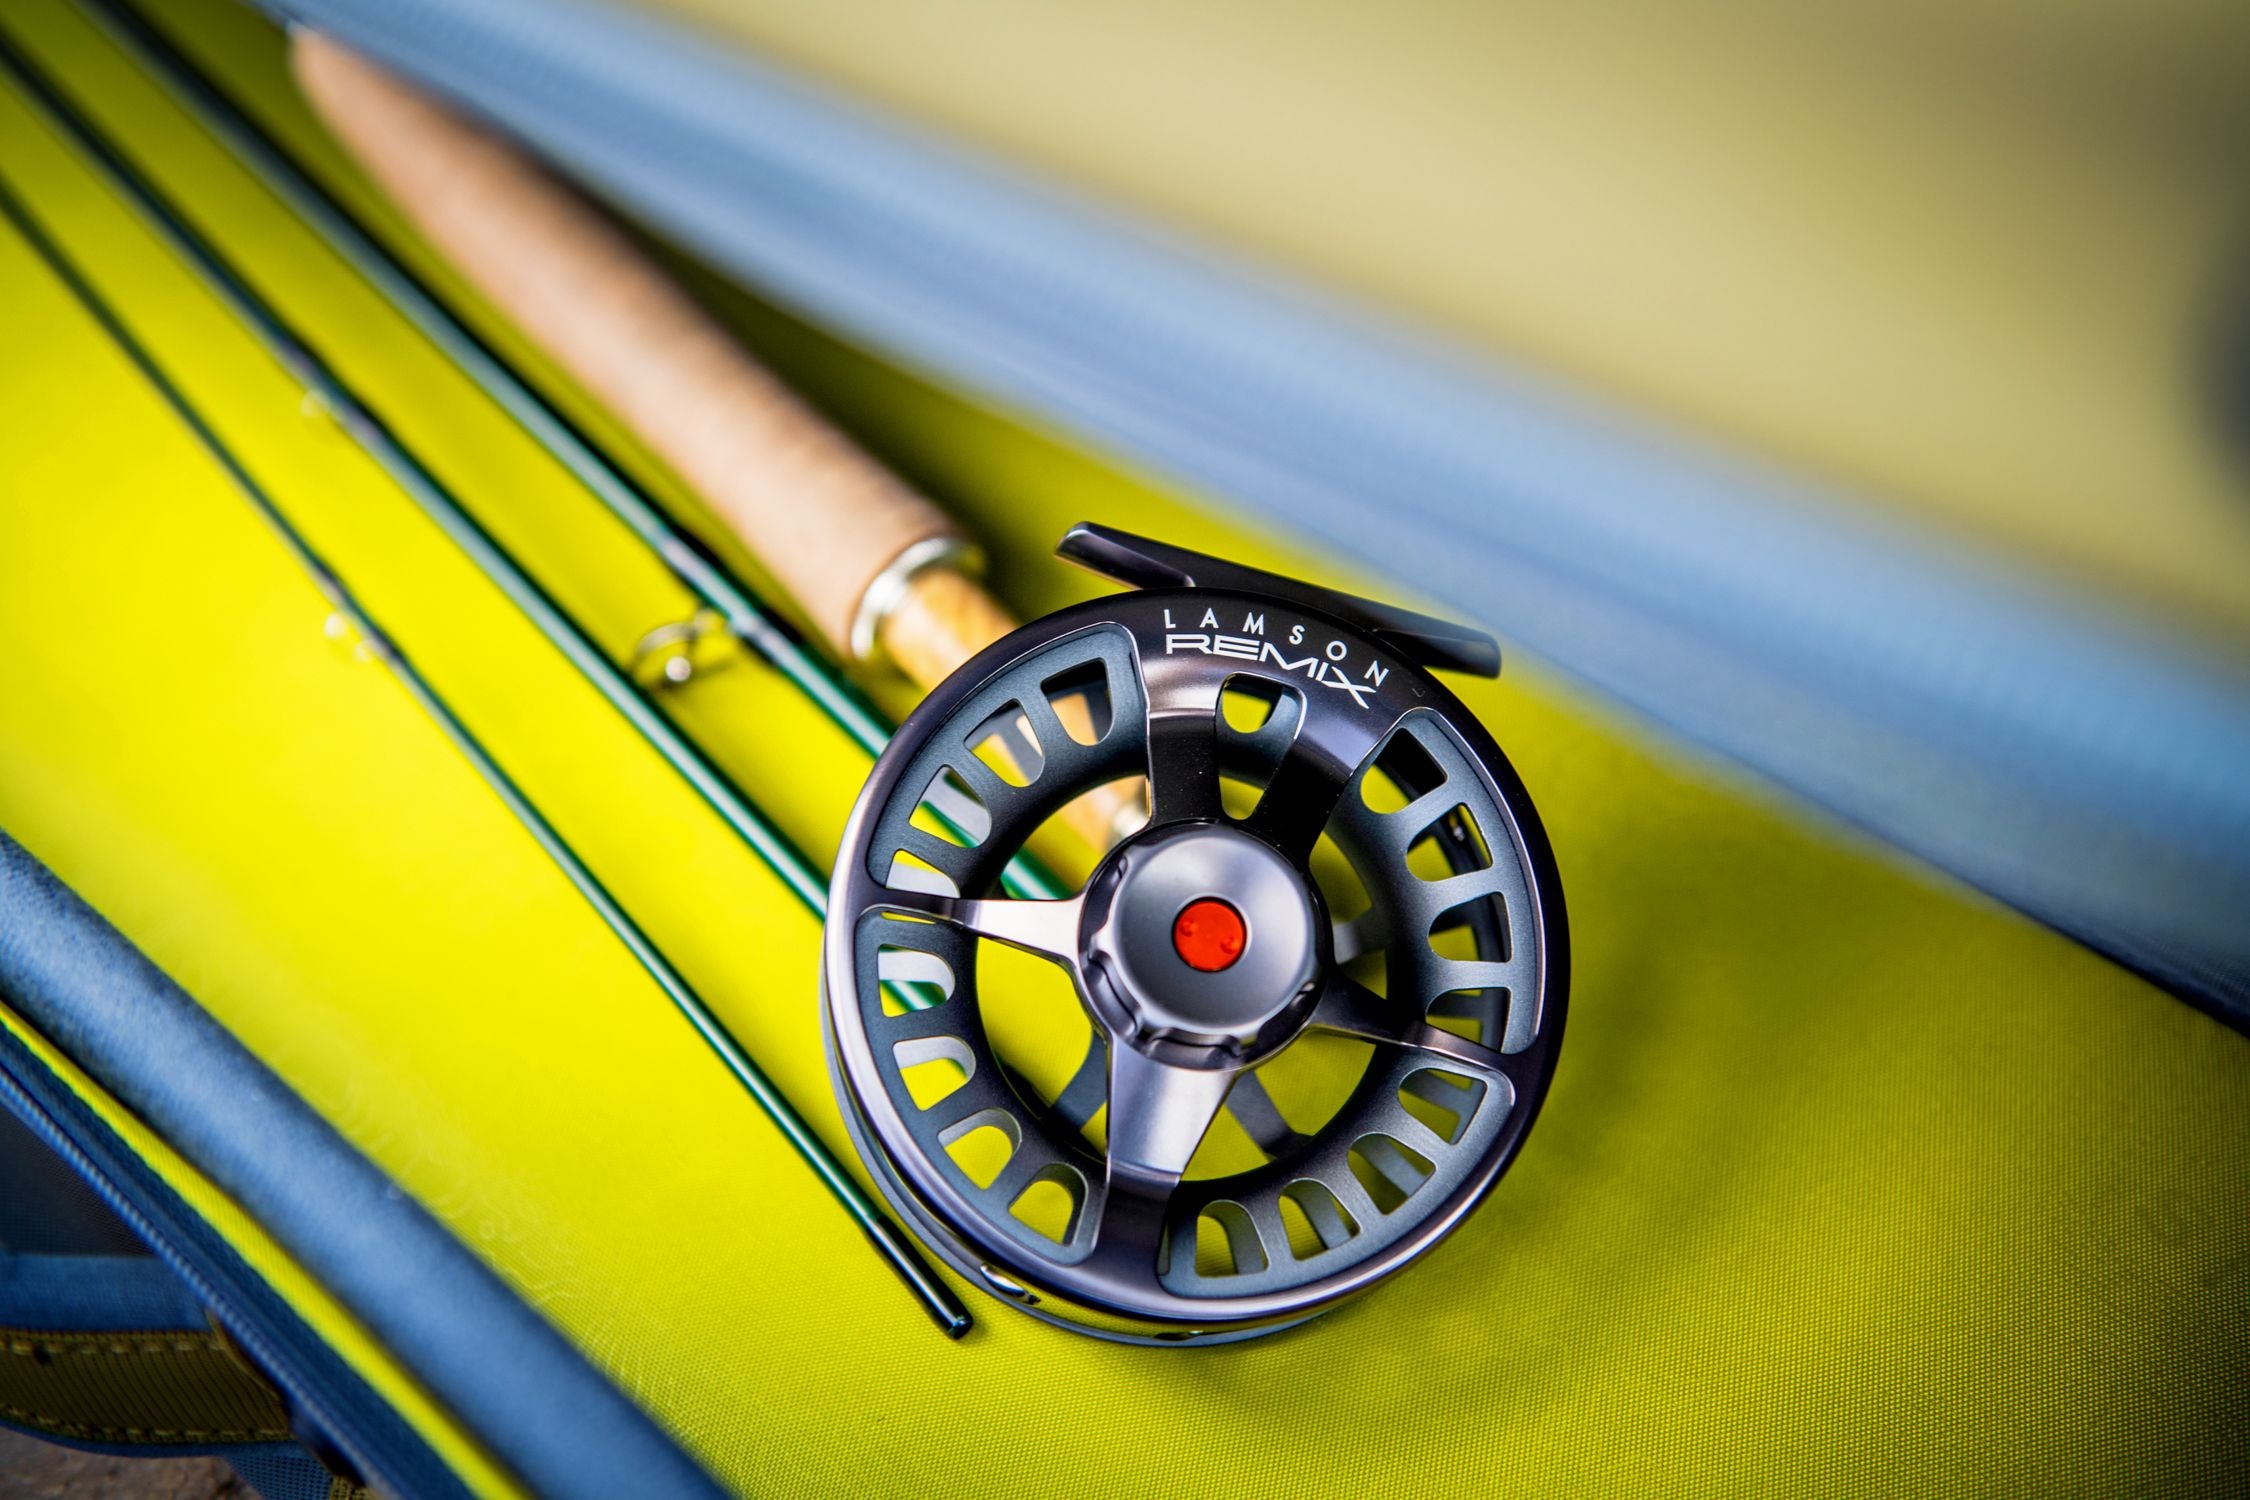 Waterworks-Lamson Remix Fly Reel Review, 43% OFF